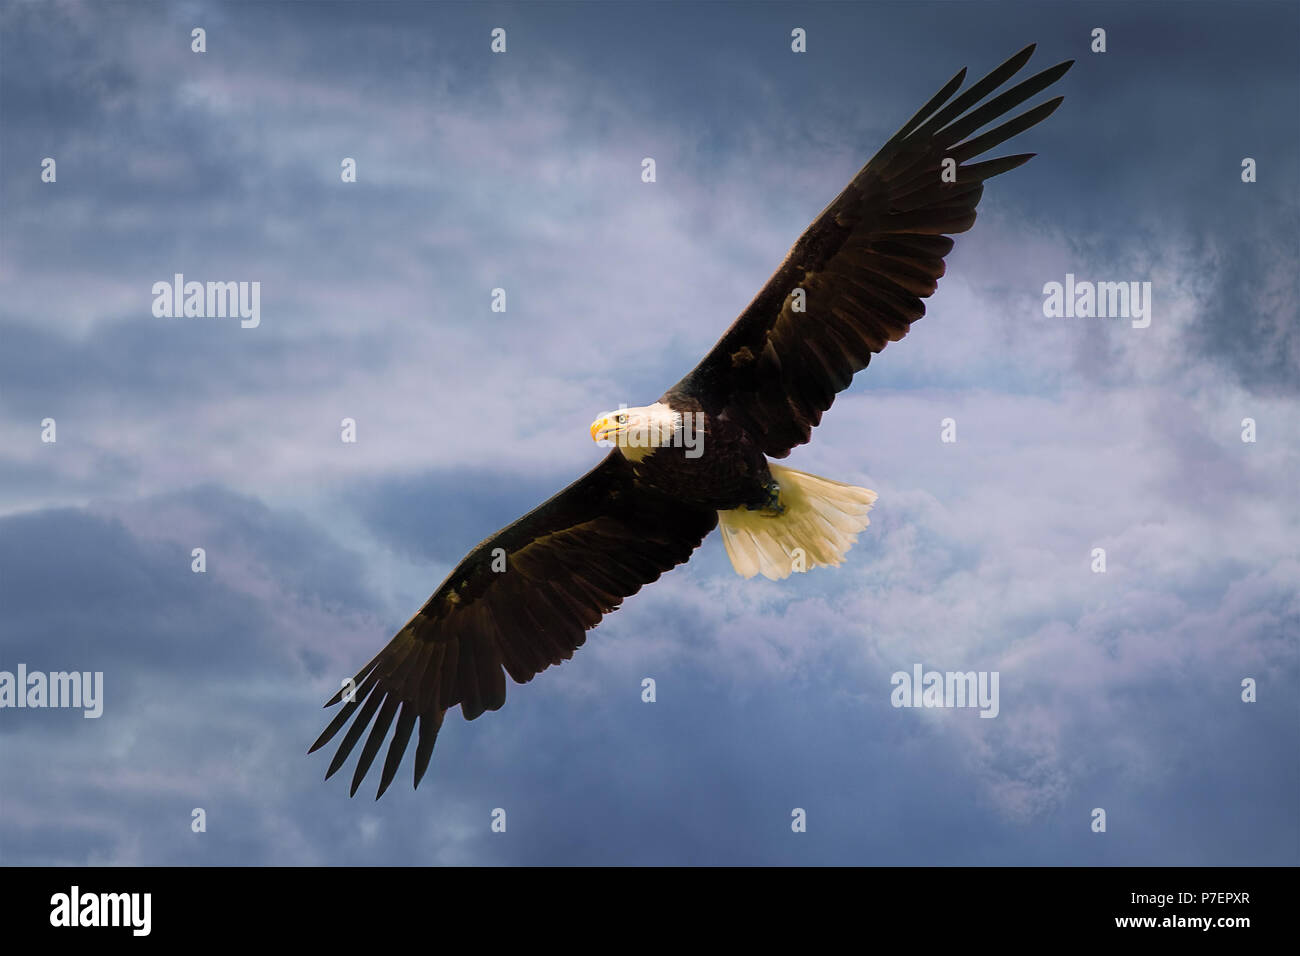 American eagle flying over dramatic sky with wide open wings. Stock Photo